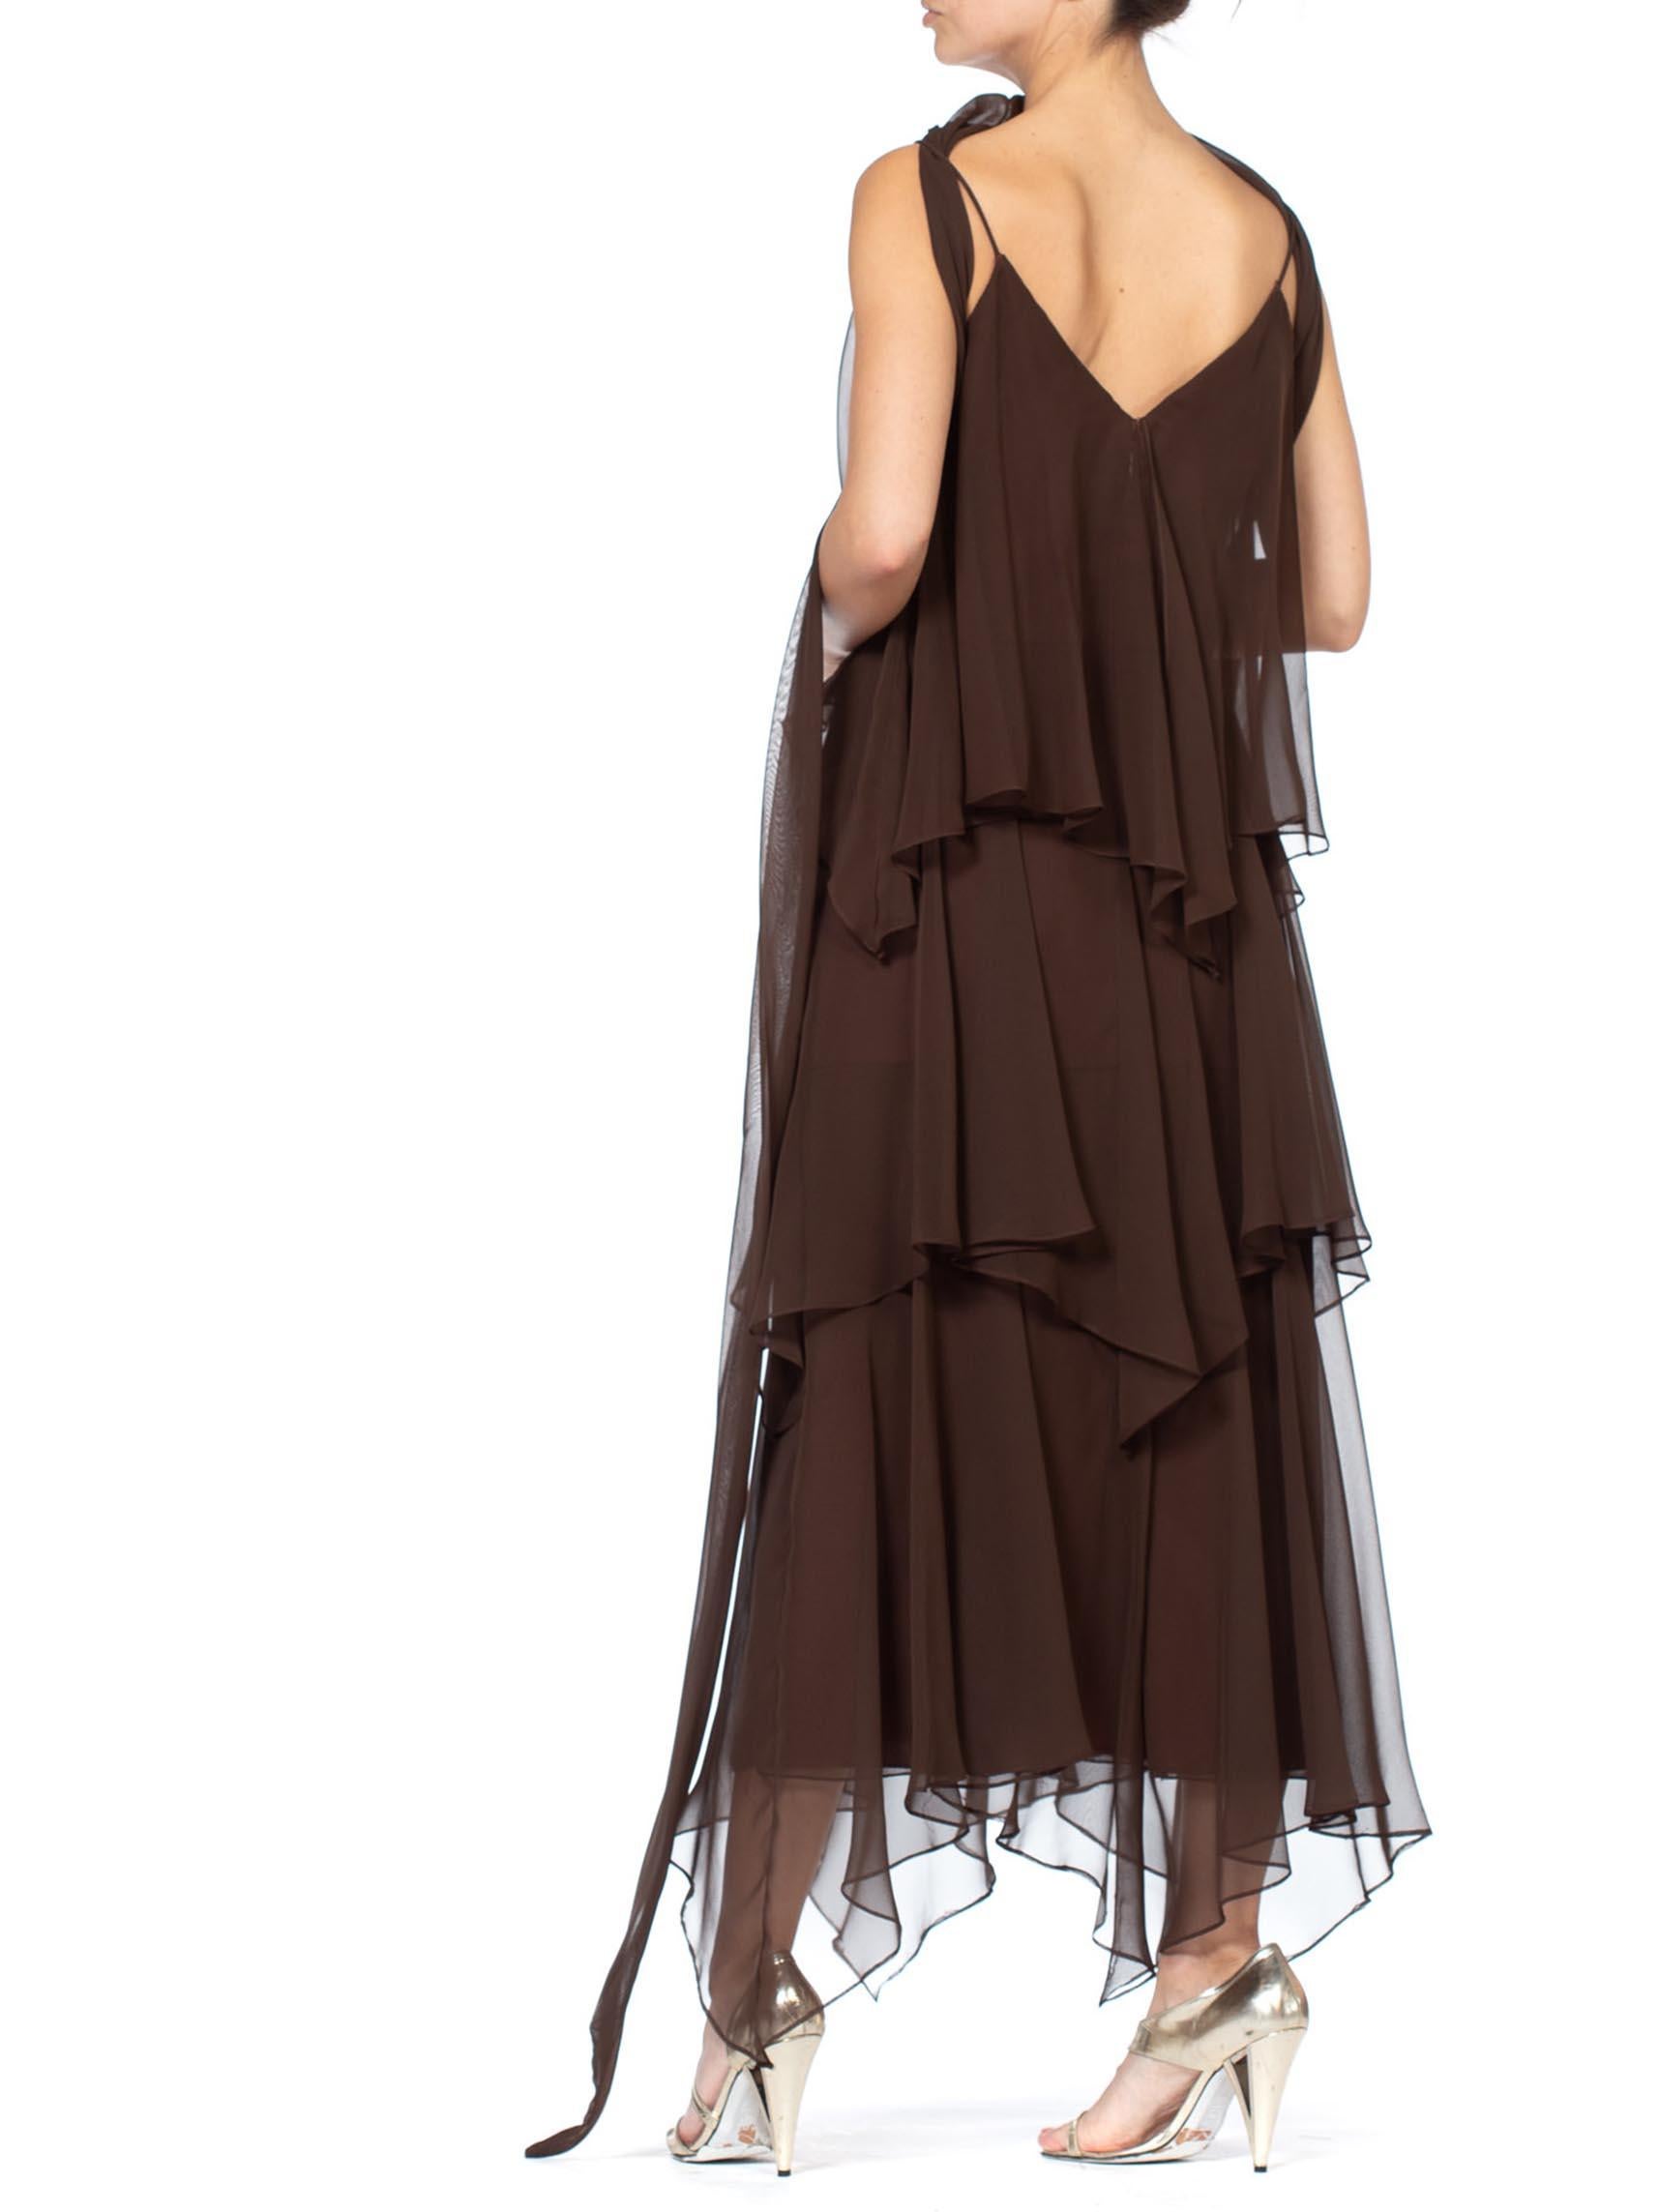 1970S ANTHONY MUTO Chocolate Brown Polyester Chiffon Disco Flapper Dress With S For Sale 4